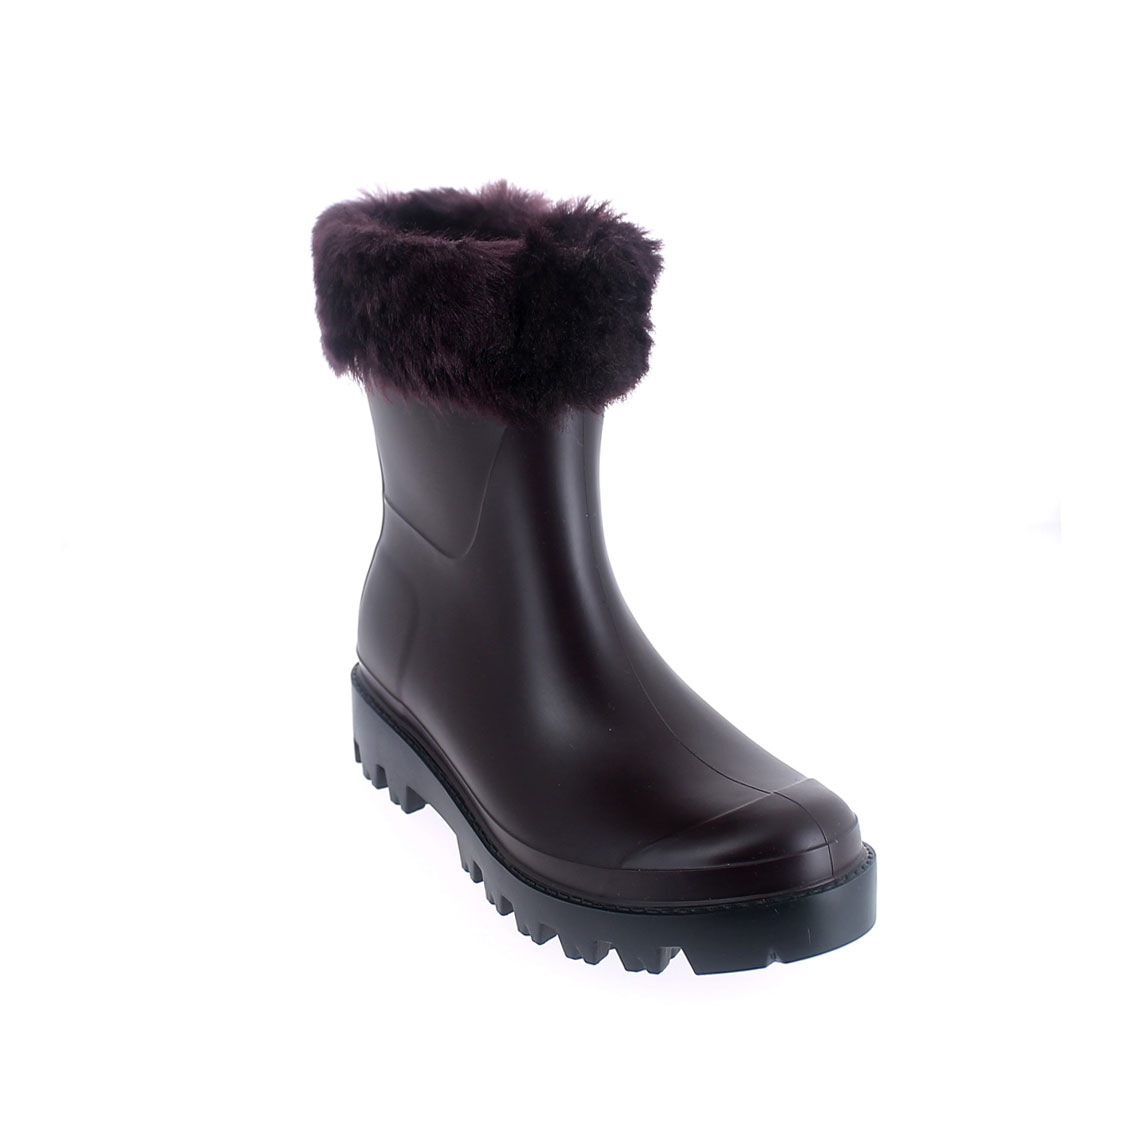 Wellington low boot in Sanguinaccio pvc with inner lining and cuff